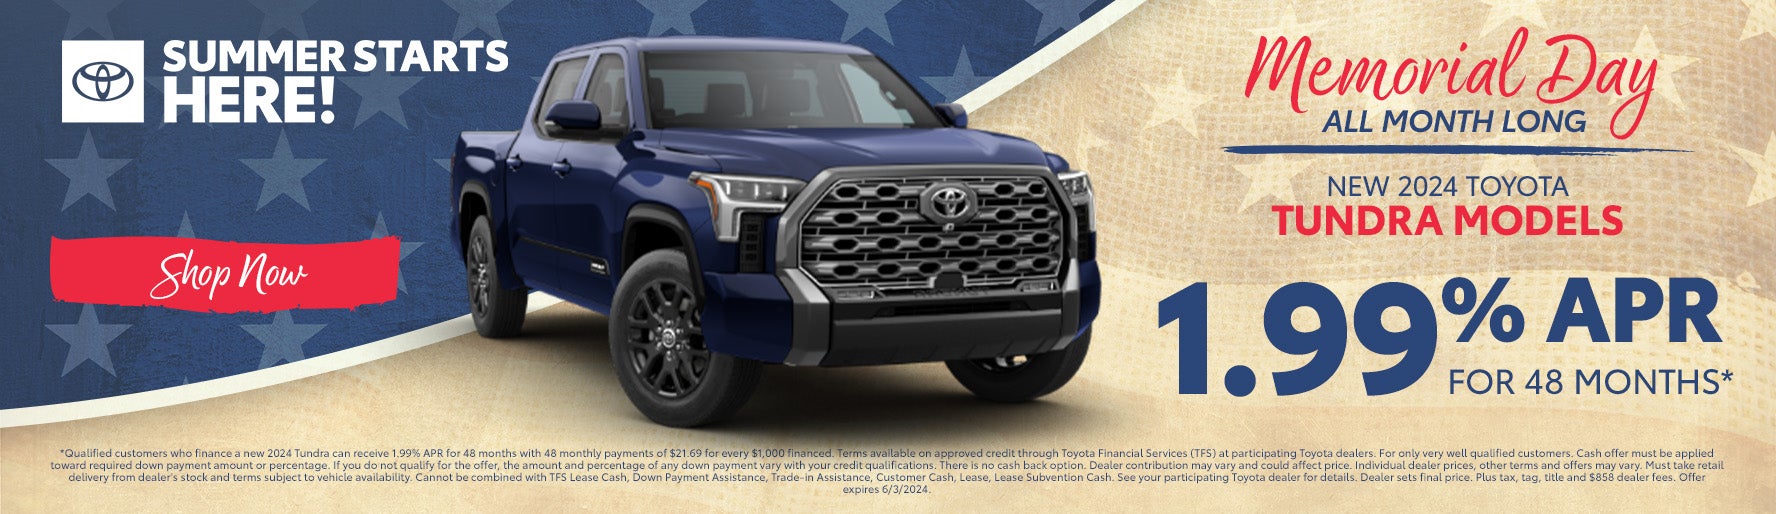 New 2024 Toyota Tundra Models 1.99% APR for 48 Months